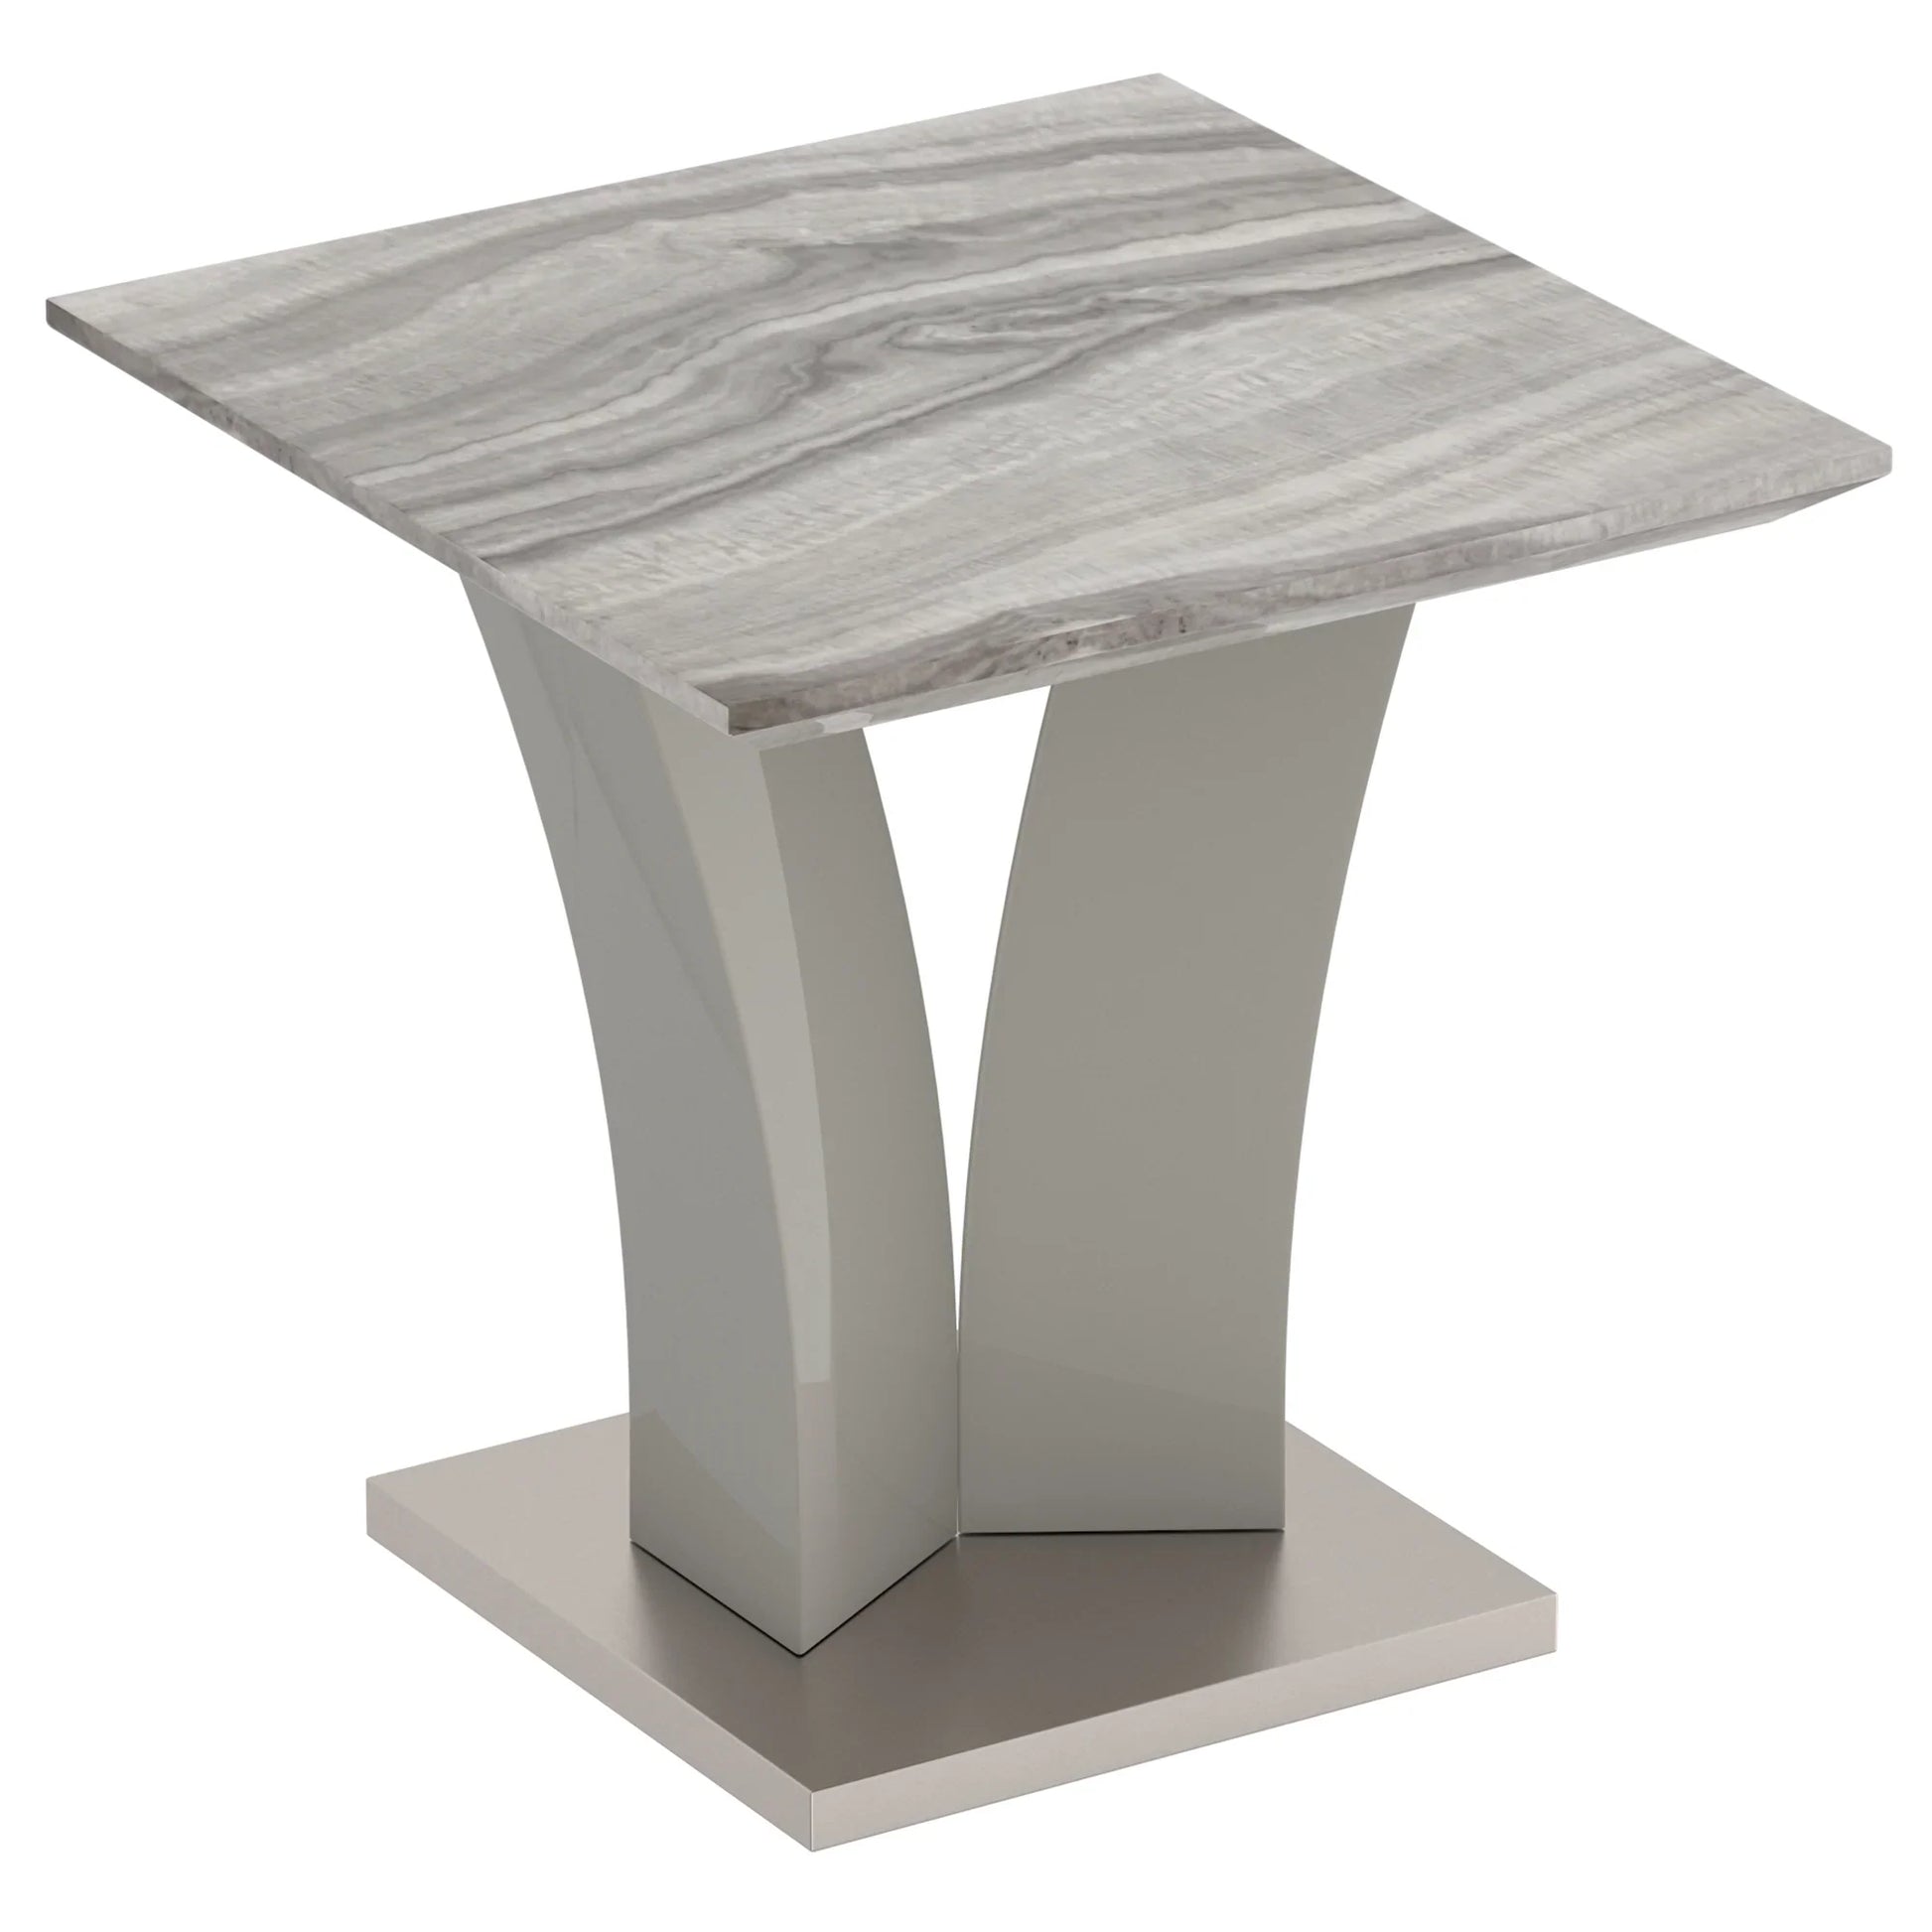 NAPOLI-ACCENT TABLE-GREY - Furniture Depot